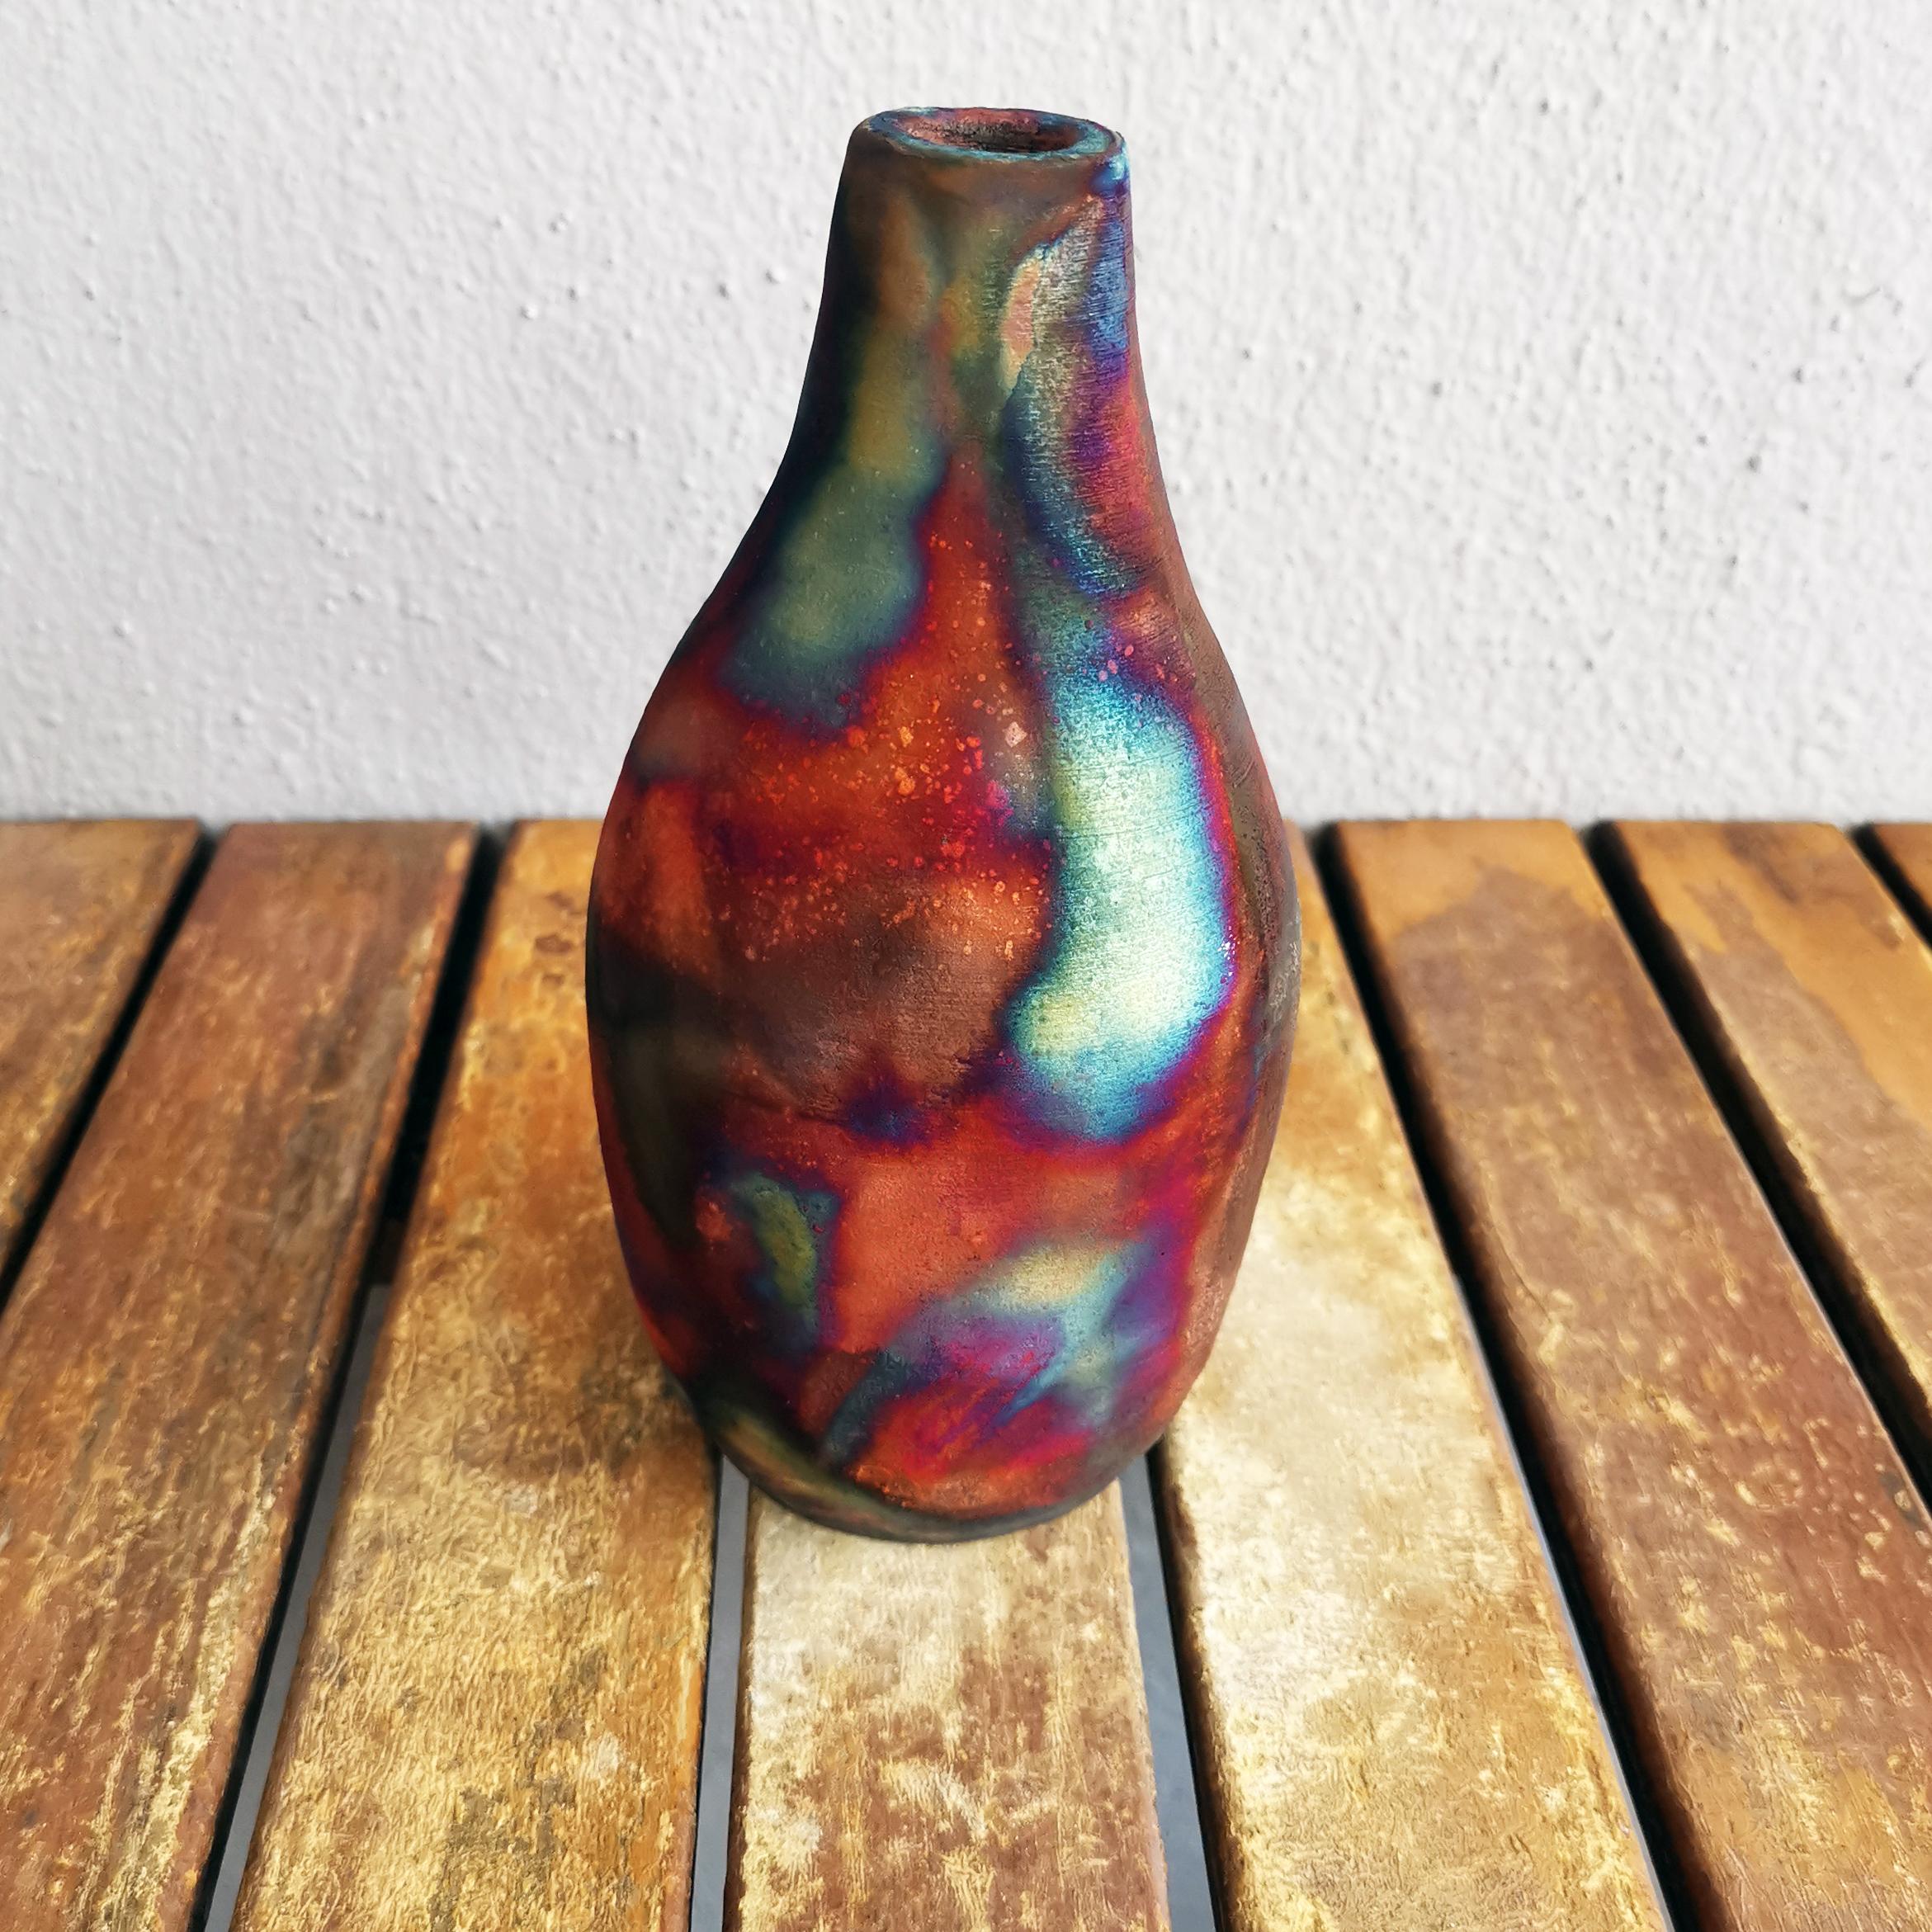 Natsu ( 夏 ) - (n) summer

Our Natsu vase is shaped almost like a soda bottle, evoking memories of summertime when it’s hot and all you would love to drink is ice-cold lemonade.

This piece would fit in very well with our Tsuri vase, Koban vase, Suzu